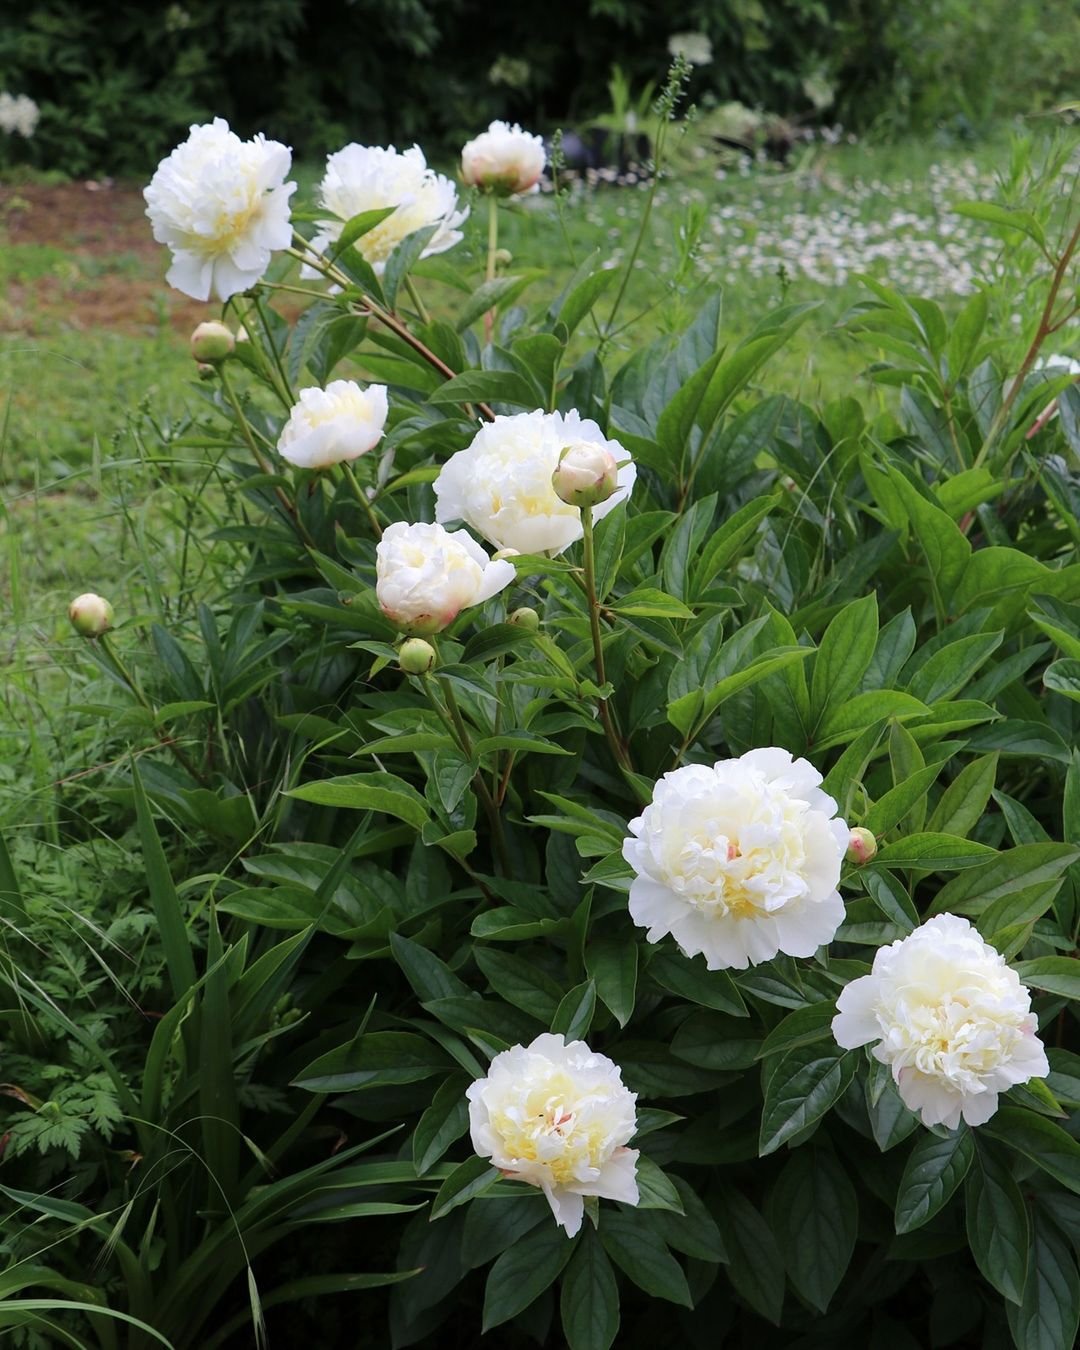 White peony flowers blooming in a garden.